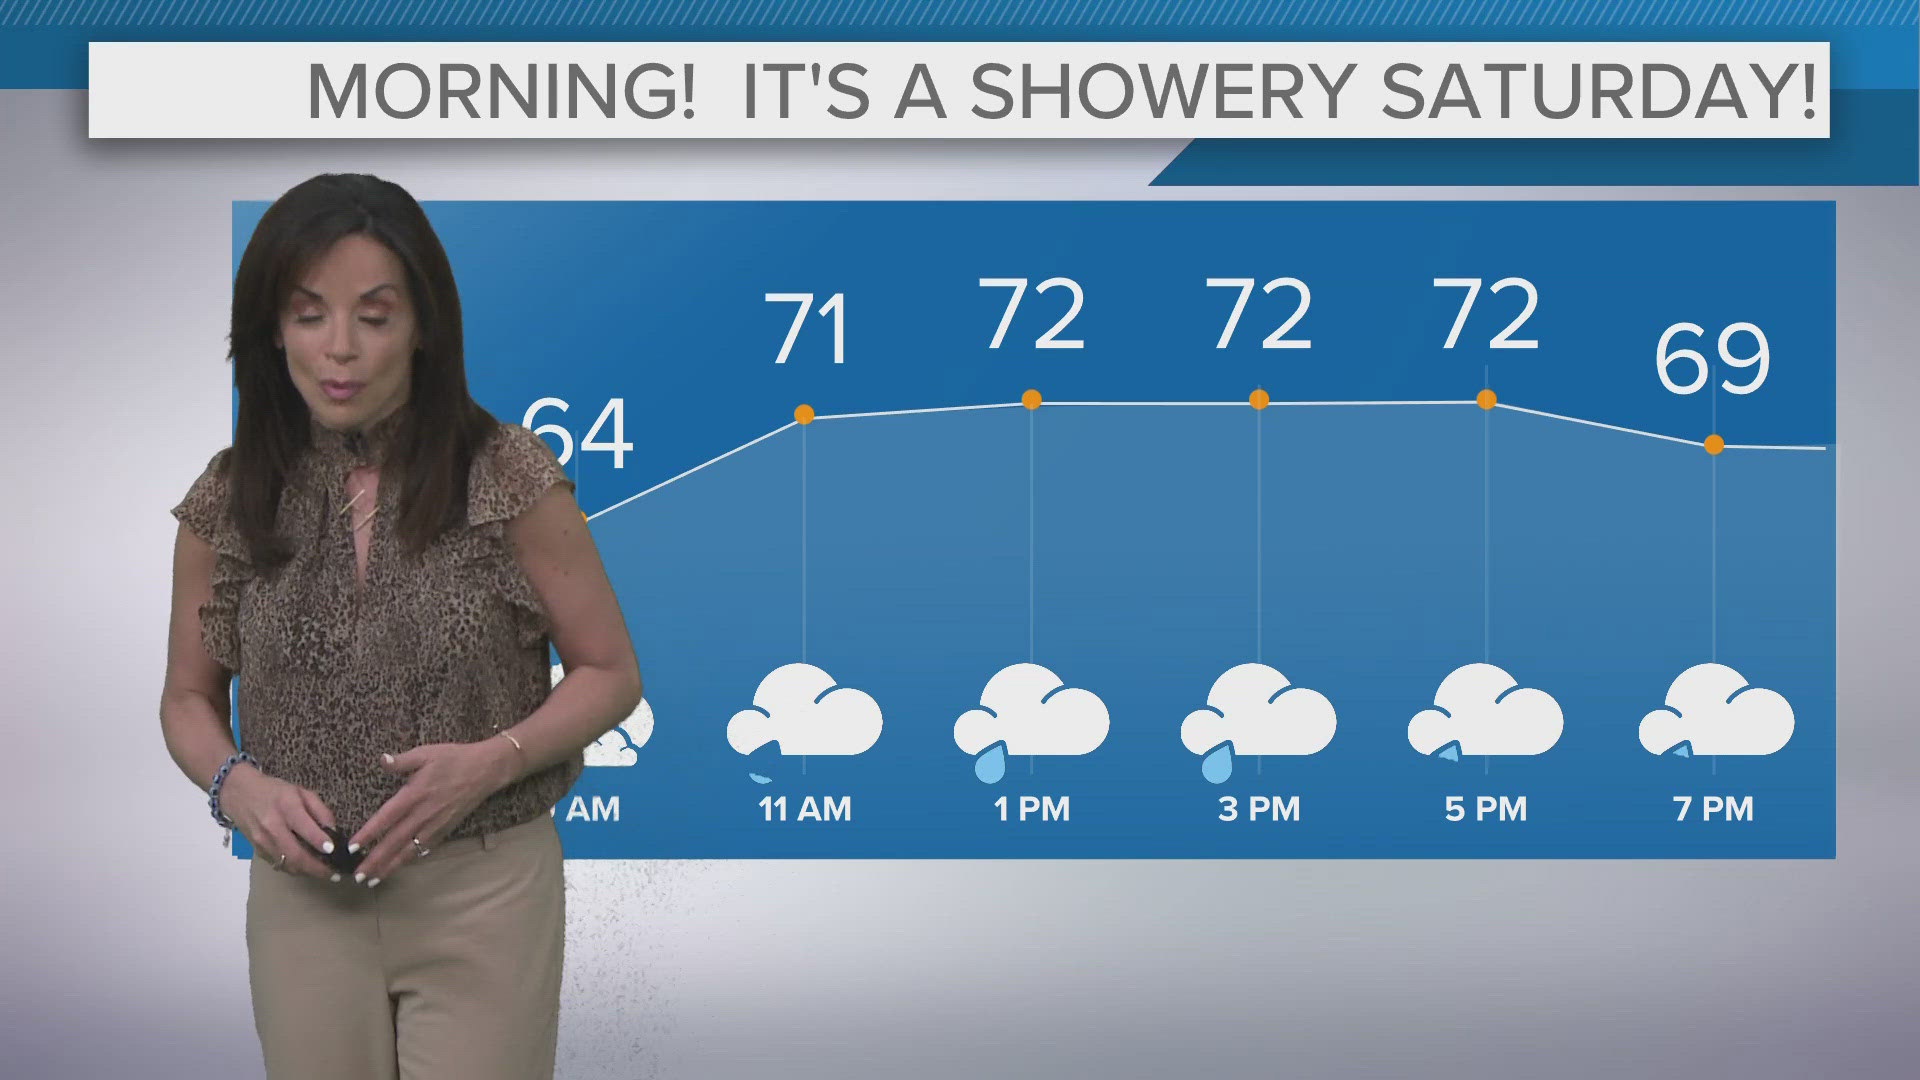 It's a showery Saturday in Northeast Ohio. Hollie Strano has the latest with your morning weather forecast.